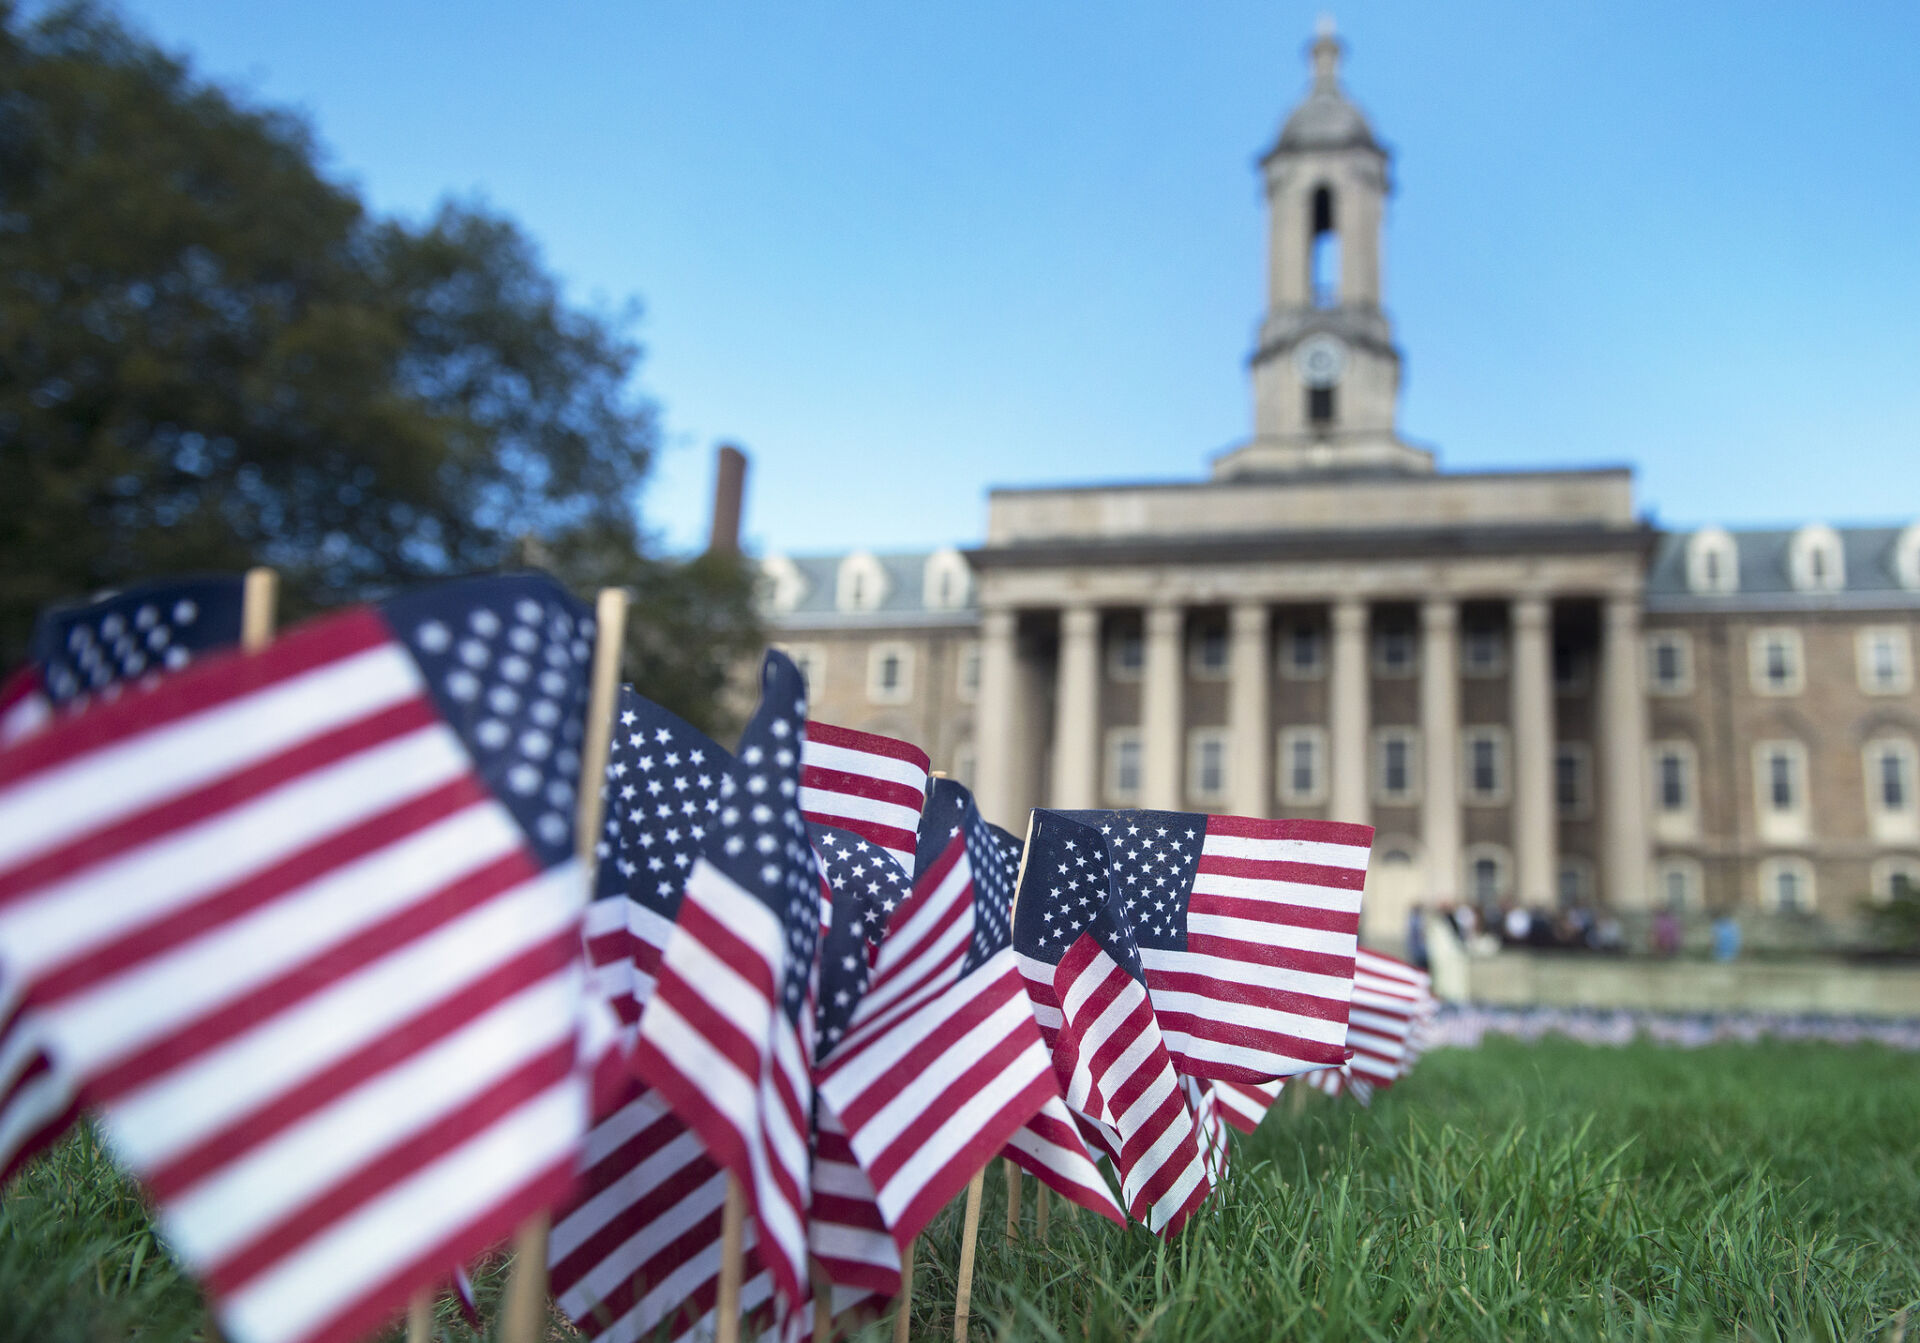 Many small U.S. flags on Old Main lawn.